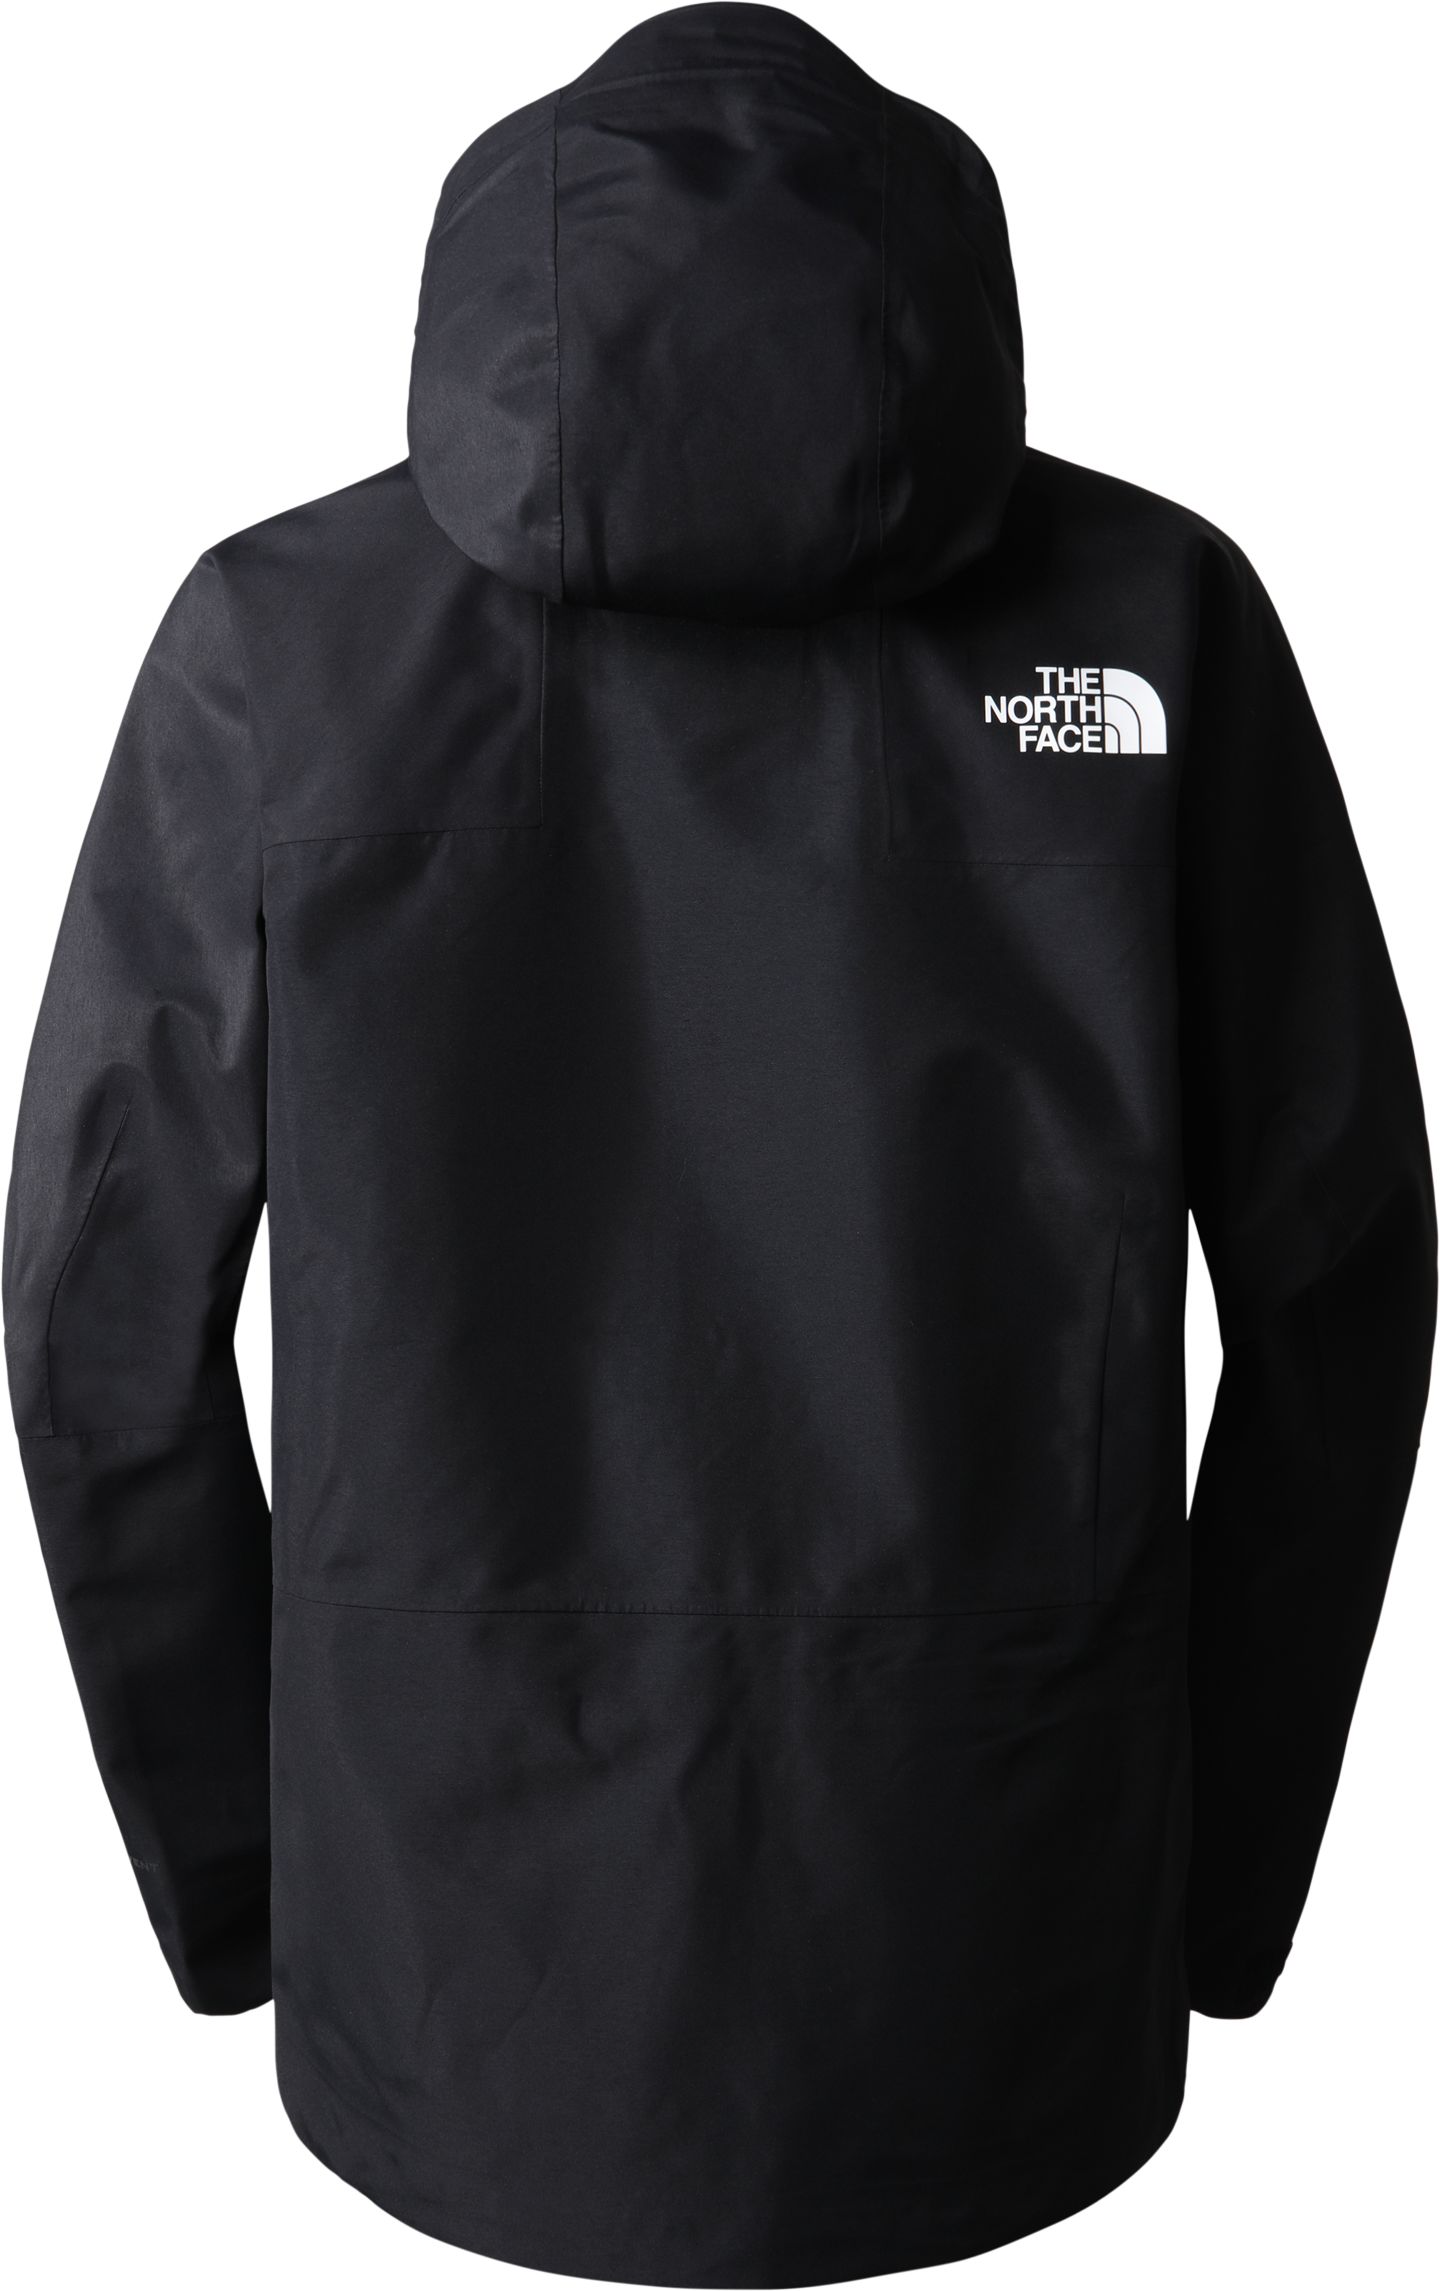 THE NORTH FACE, W CEPTOR JKT